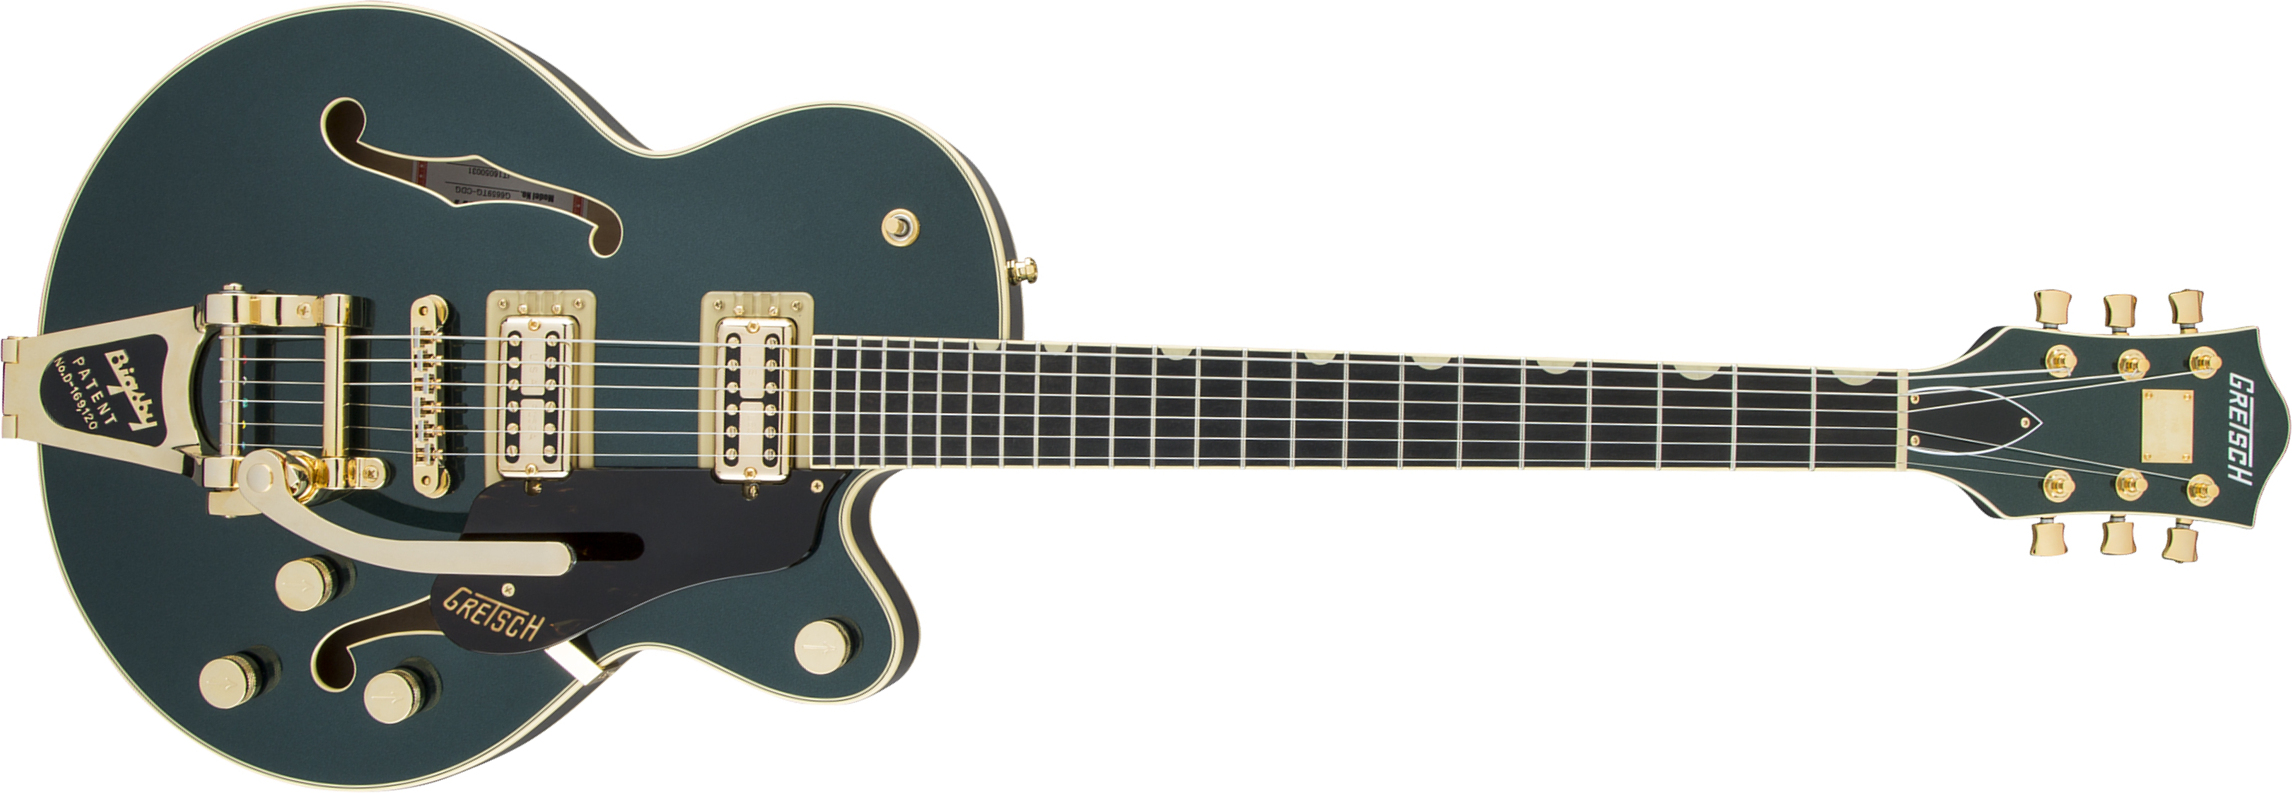 Gretsch G6659tg Broadkaster Jr Center Bloc Players Edition Bigsby Pro Jap 2h Trem Eb - Cadillac Green - Semi-hollow electric guitar - Main picture